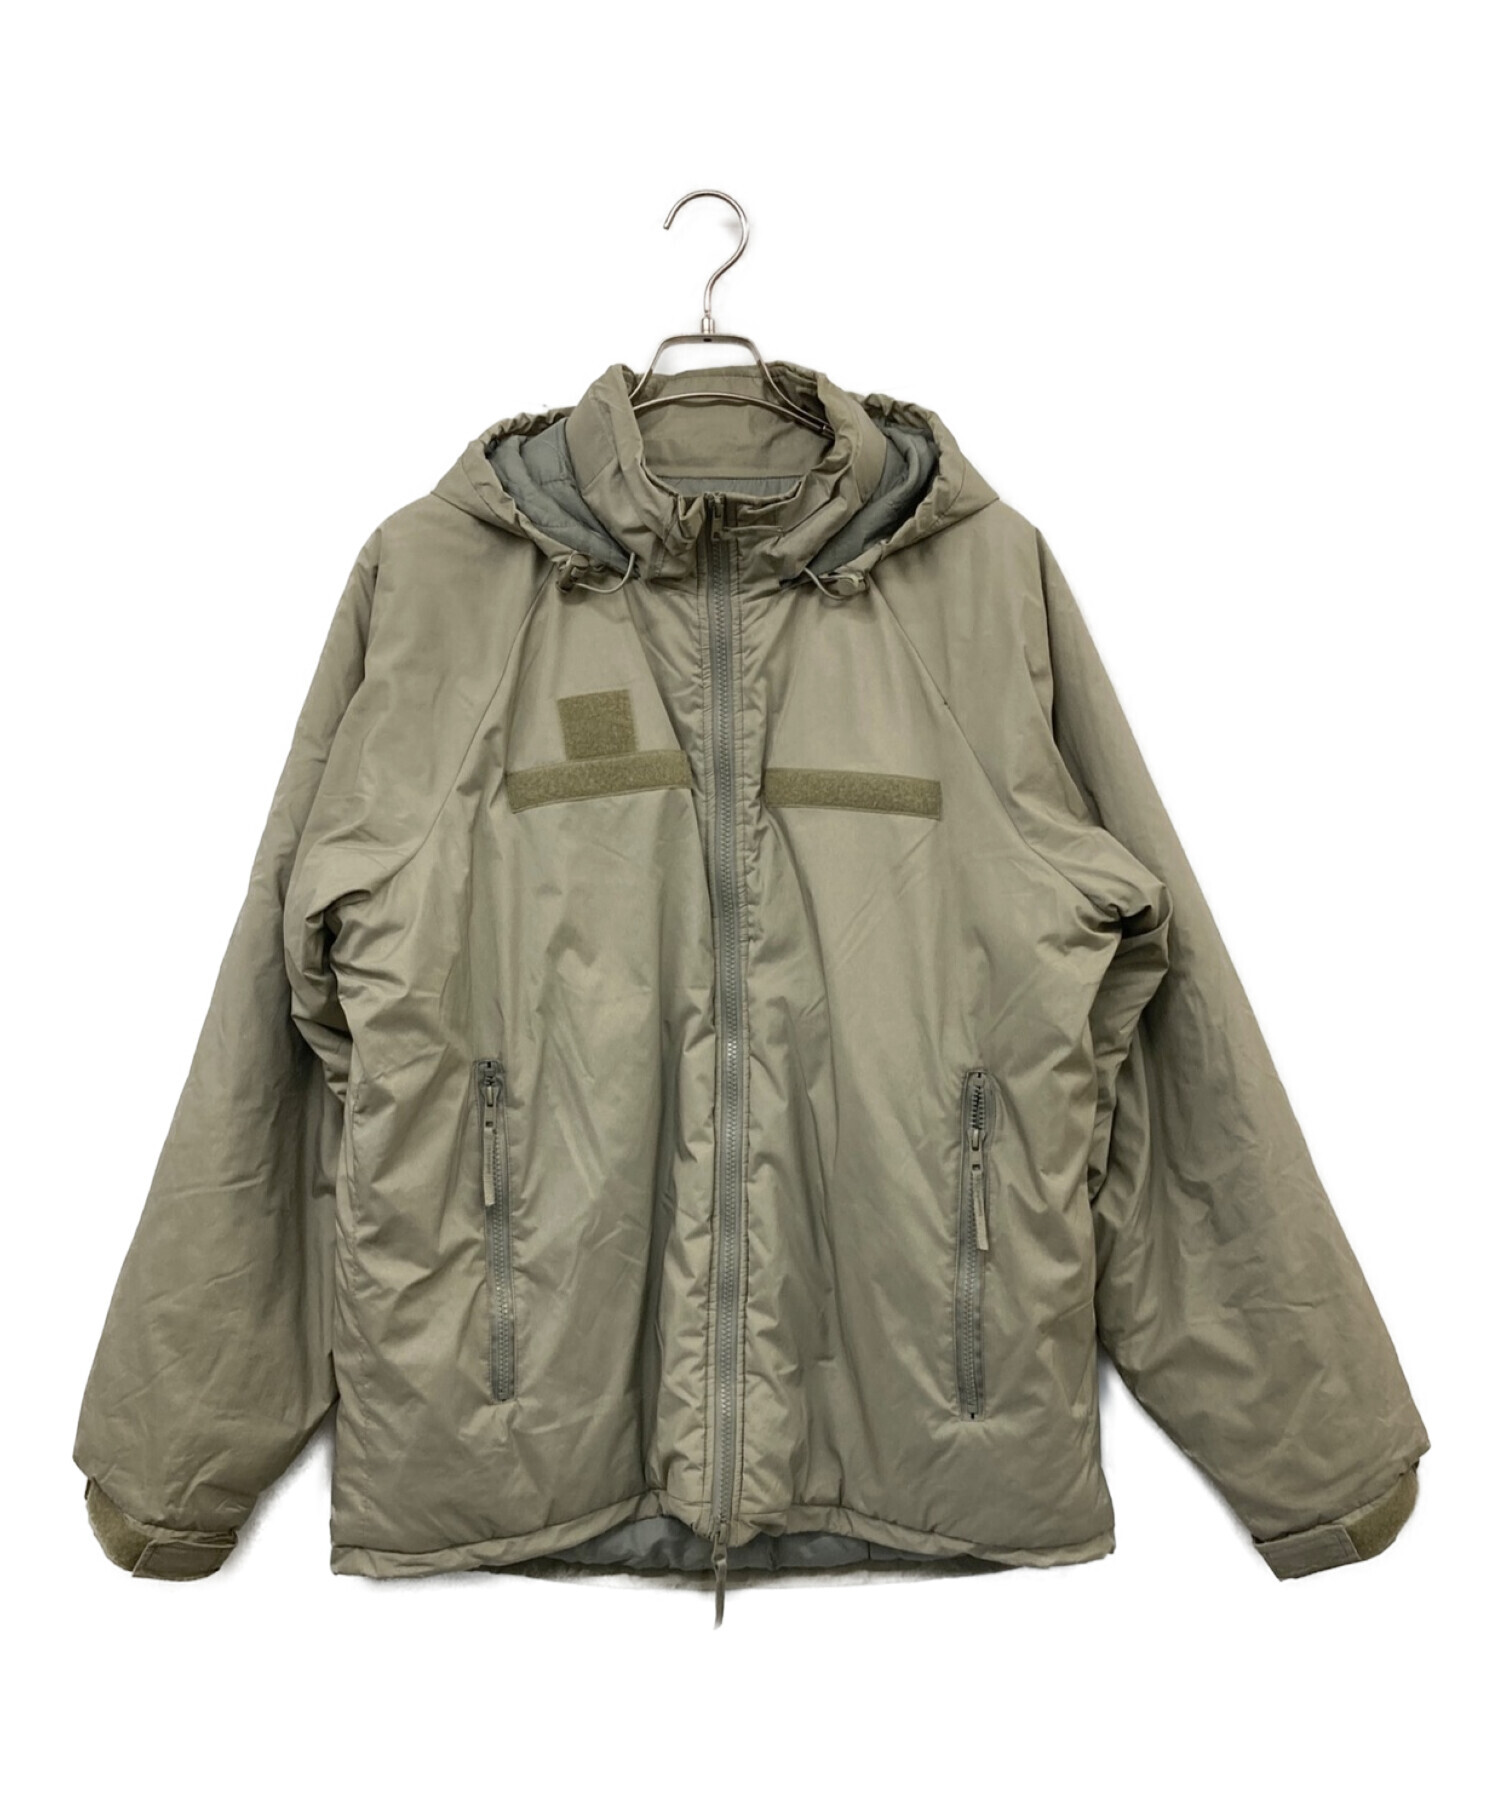 US ARMY (ユーエス アーミー) PARKA EXTREME COLD WEATHER ECWCS GEN3 LEVEL7  プリマロフト中綿ジャケット カーキグレー サイズ: S-Regular